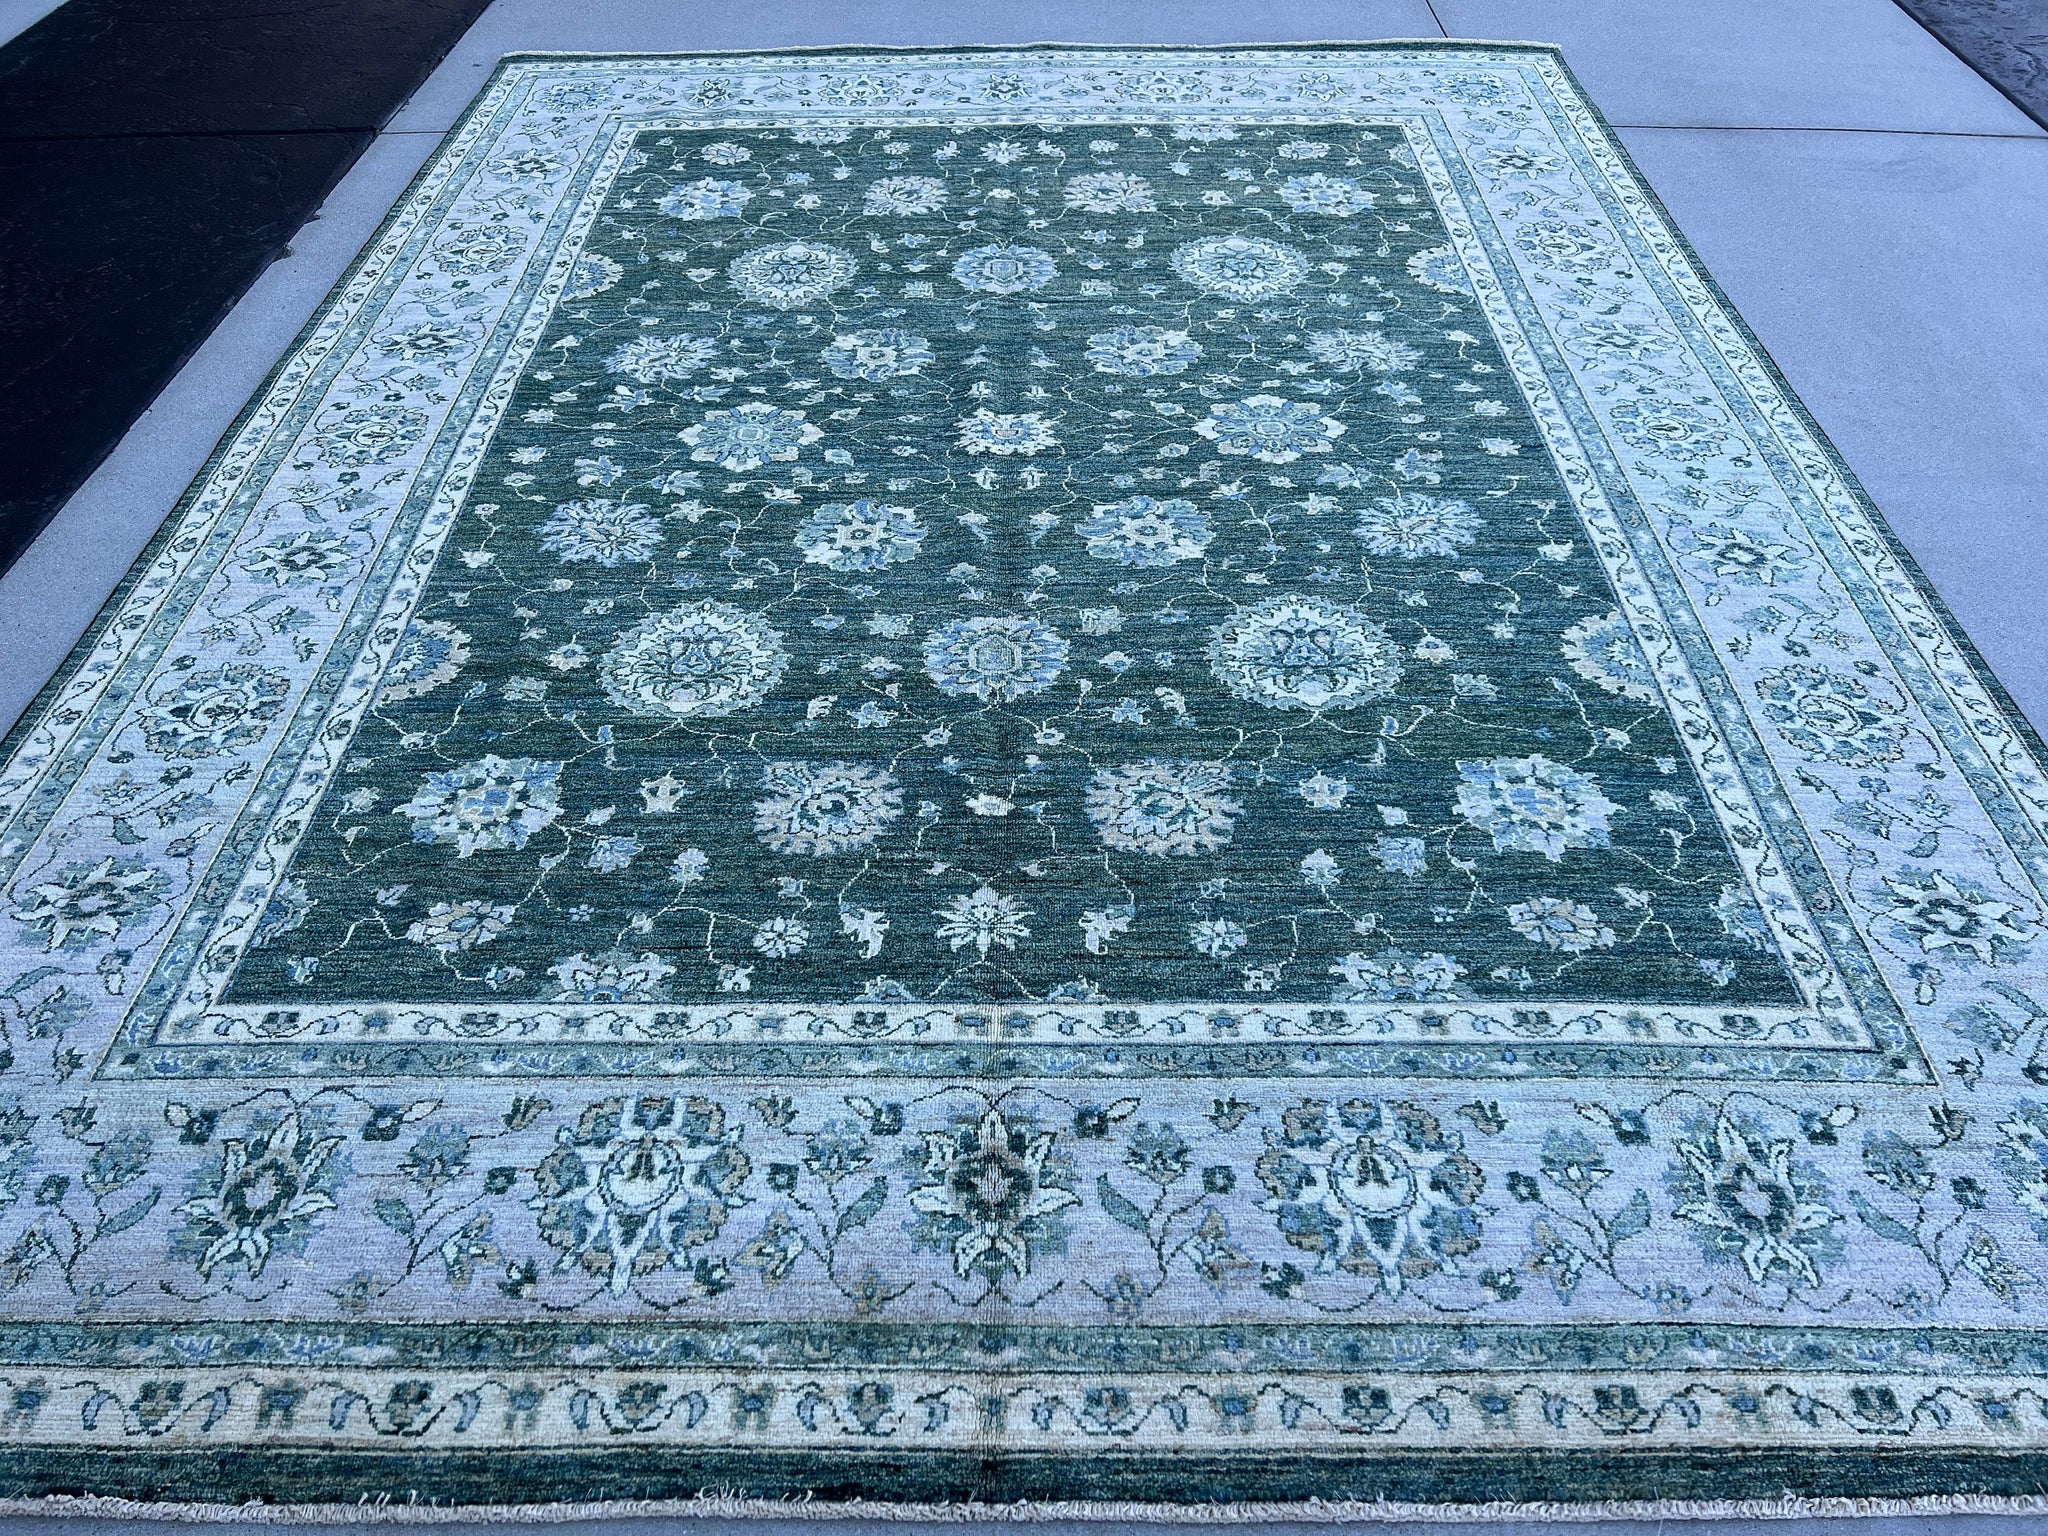 8x11 Handmade Afghan Rug | Forest Green Grey Cream Charcoal | Turkish Oushak Vintage Persian Tribal Floral Hand Knotted Wool Modern Tribal